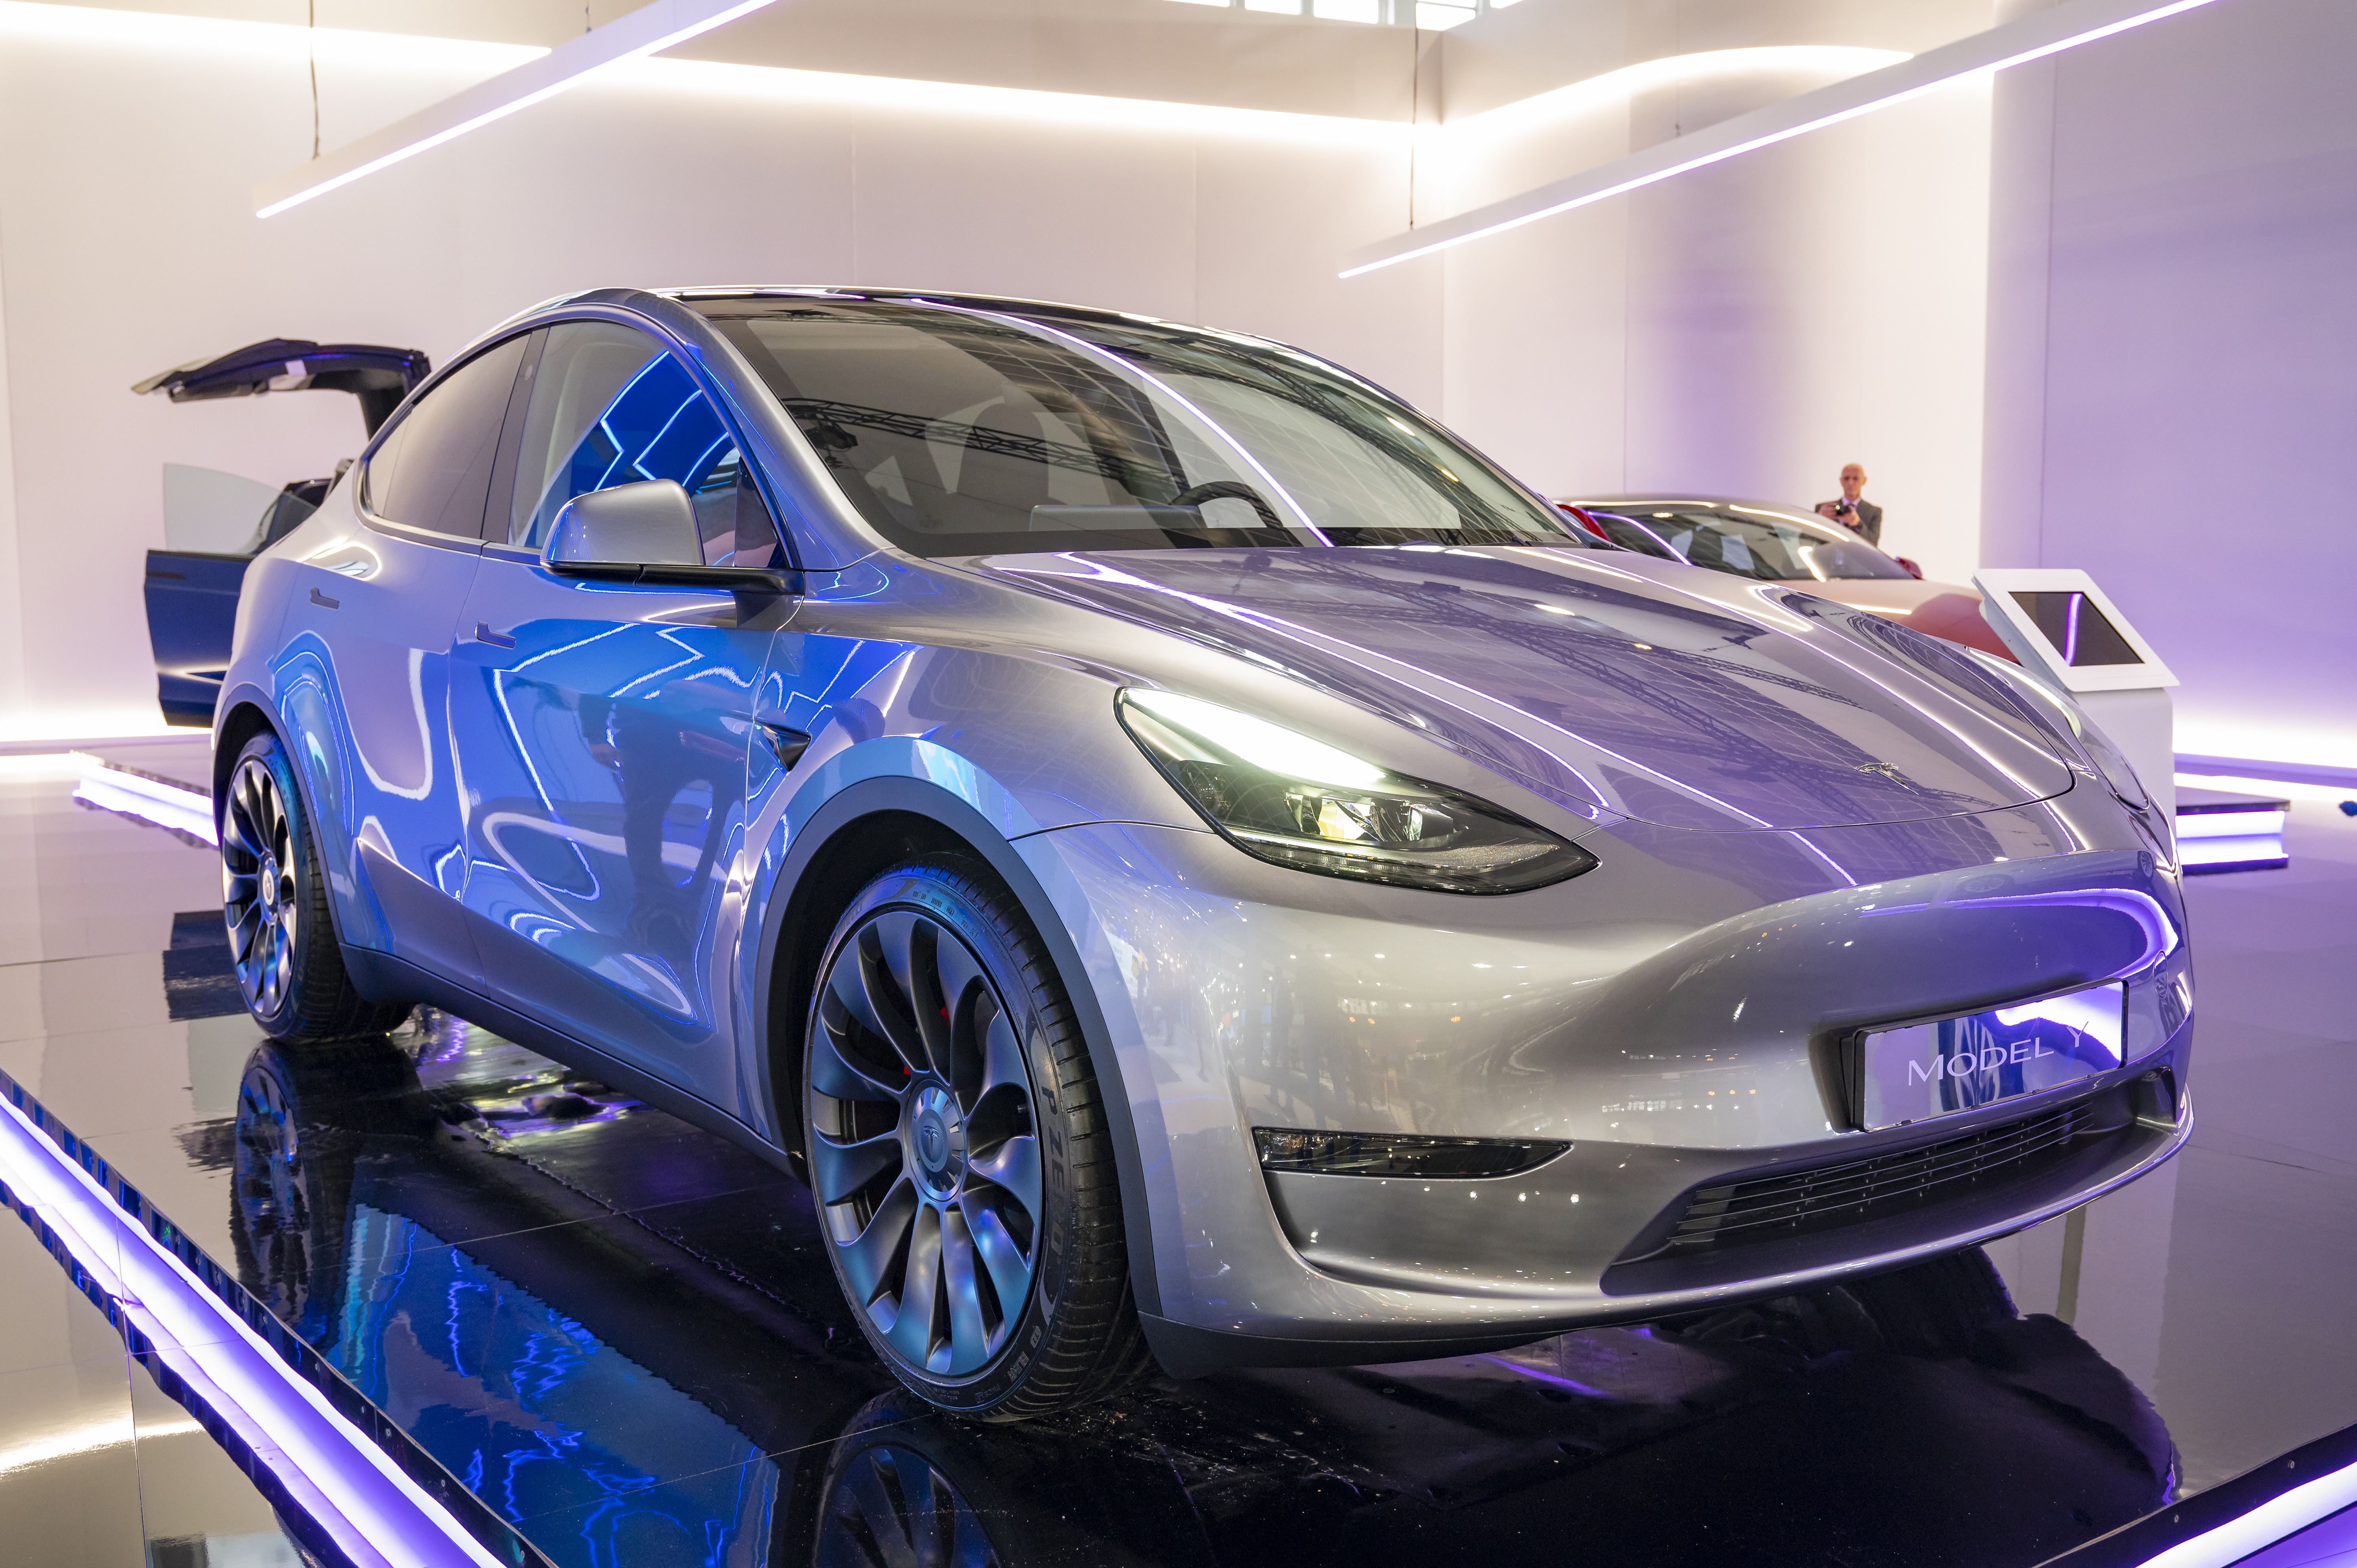 Tesla’s five-seat Model Y and other EVs now qualify for the new $7,500 federal tax credit